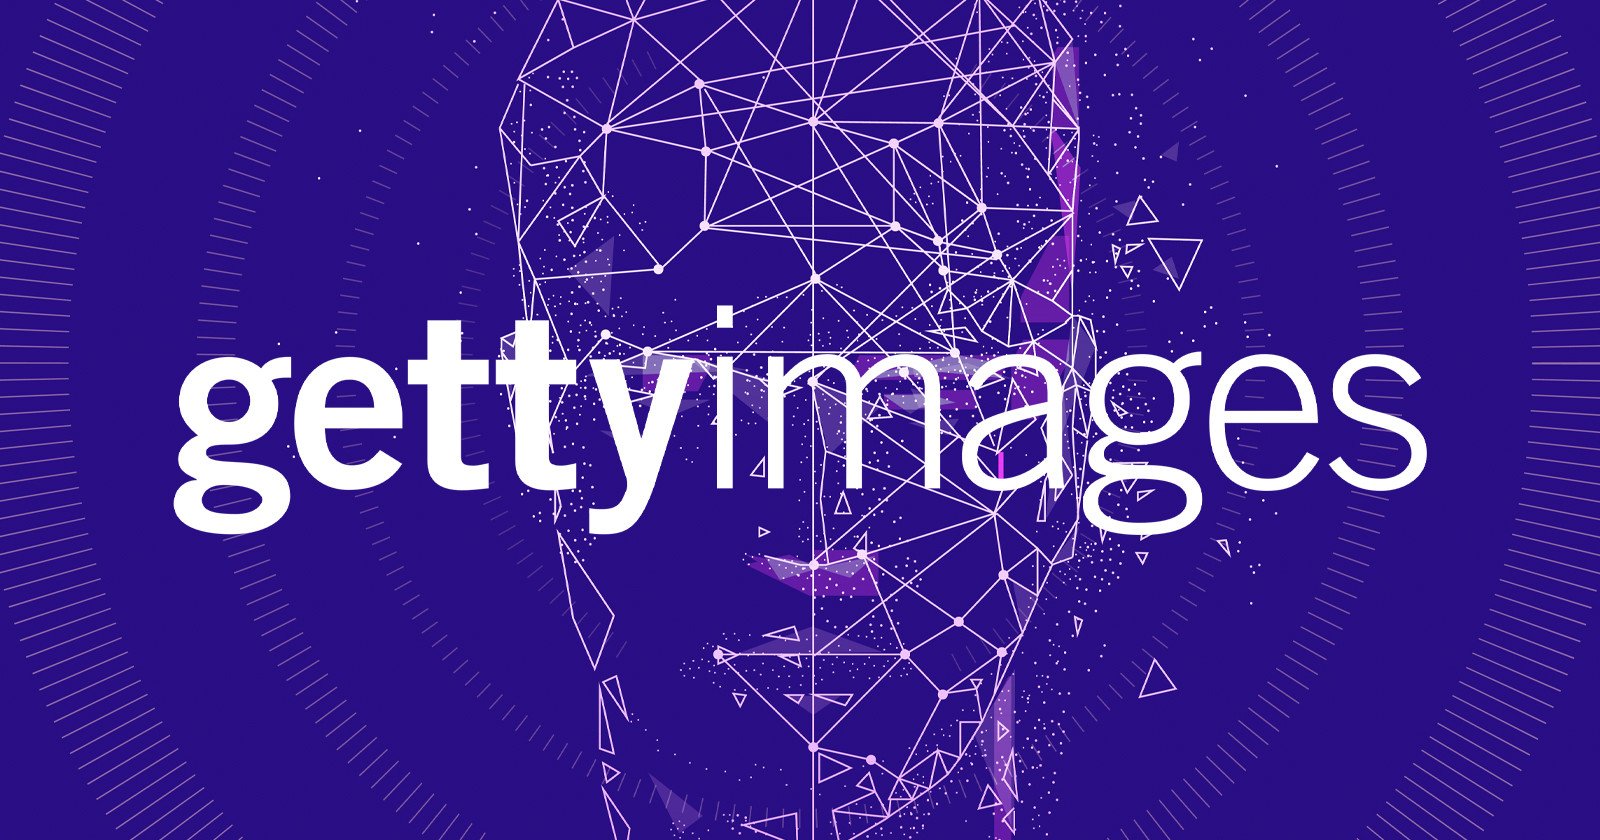  getty launches first model release covers 